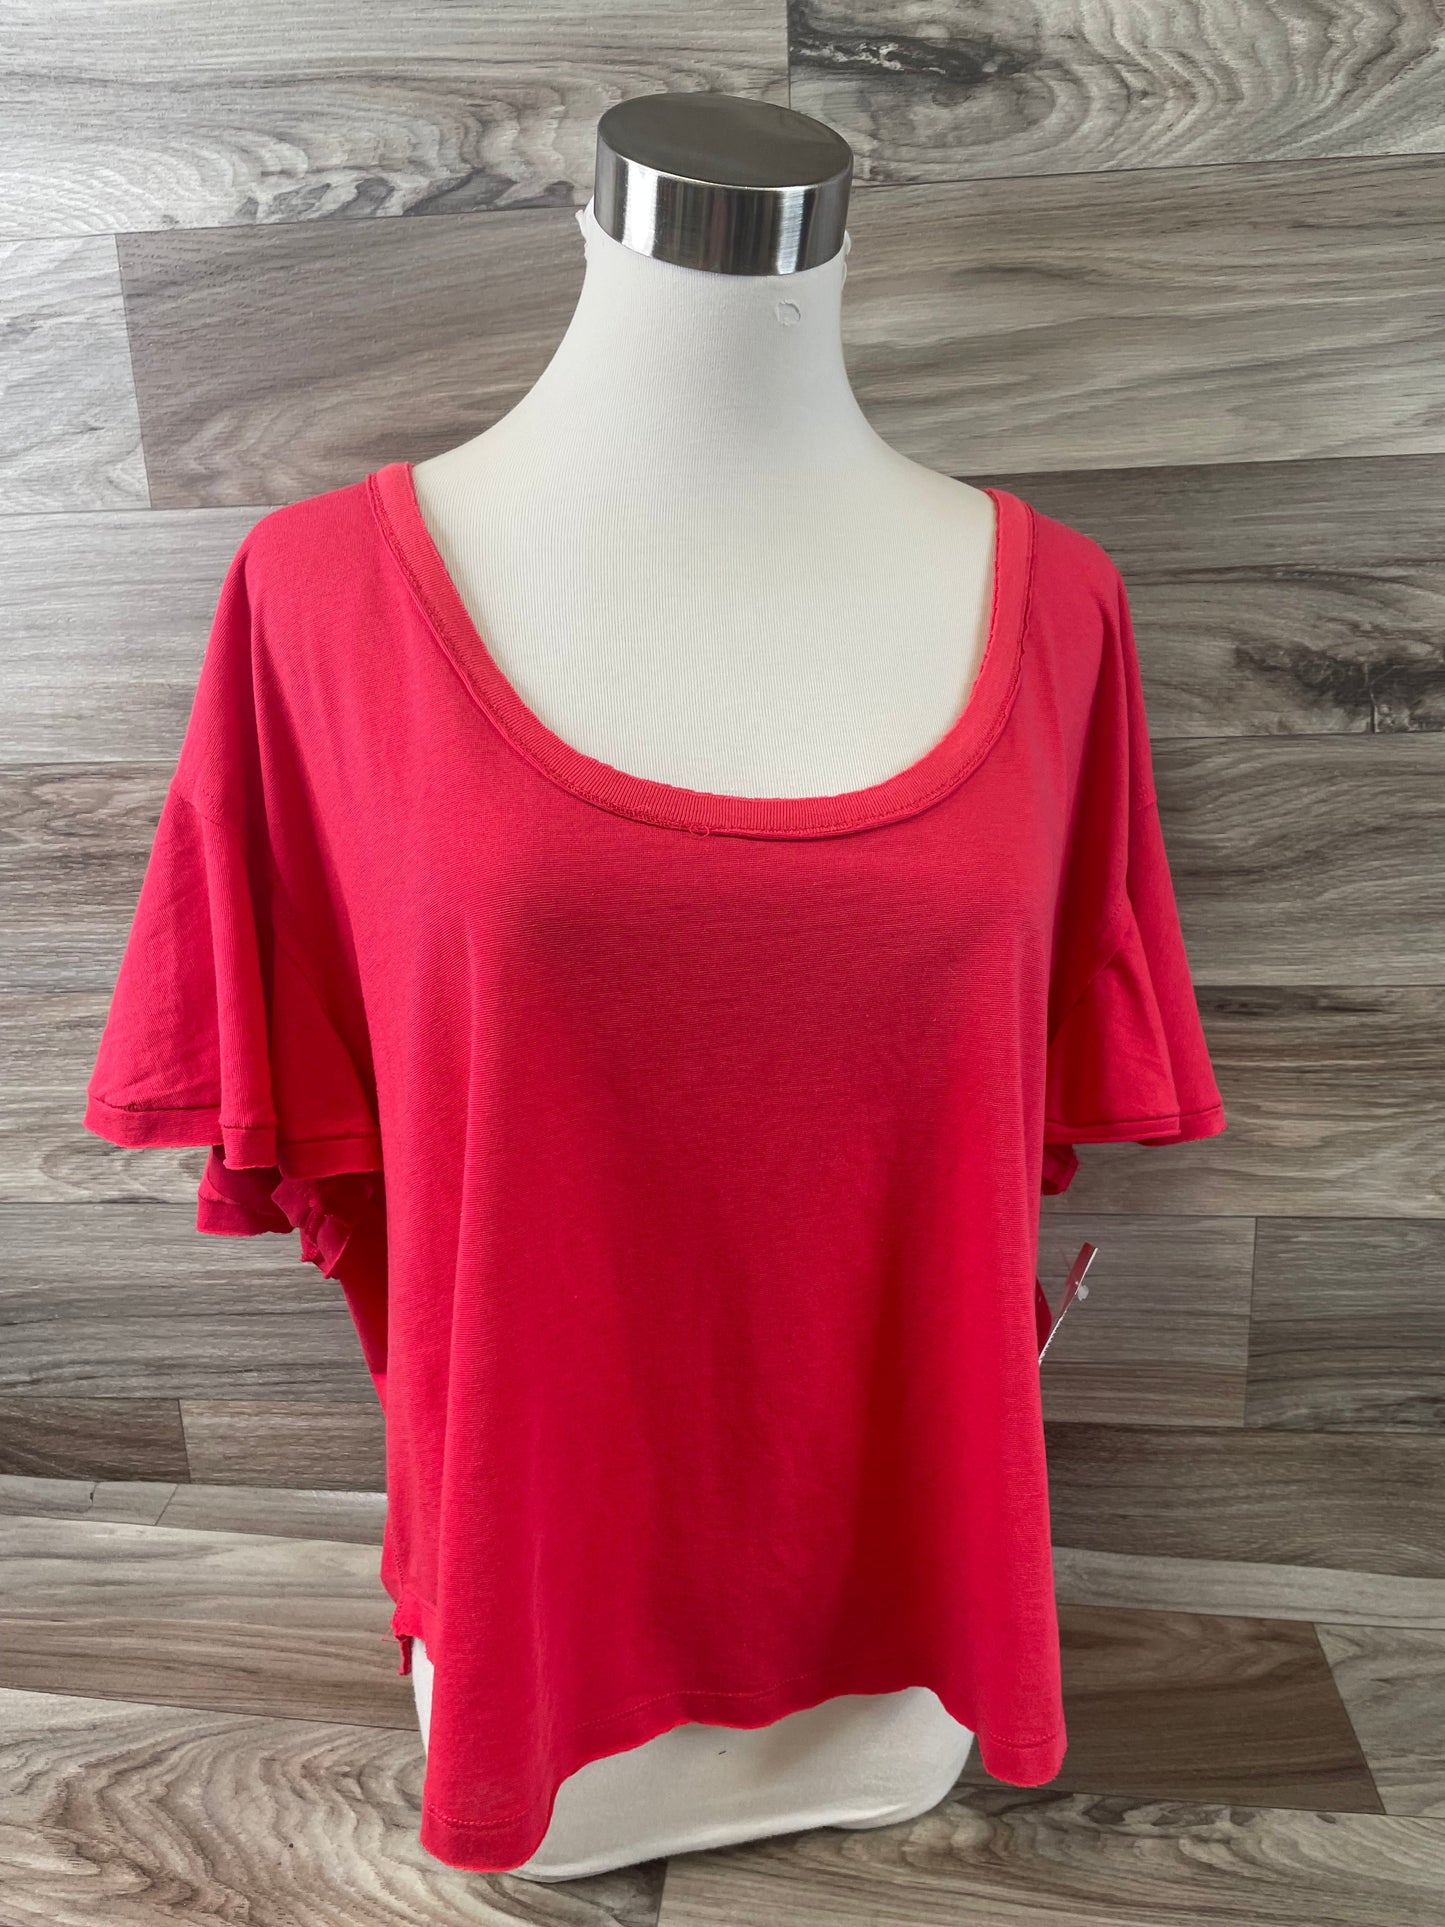 Red Top Short Sleeve We The Free, Size M